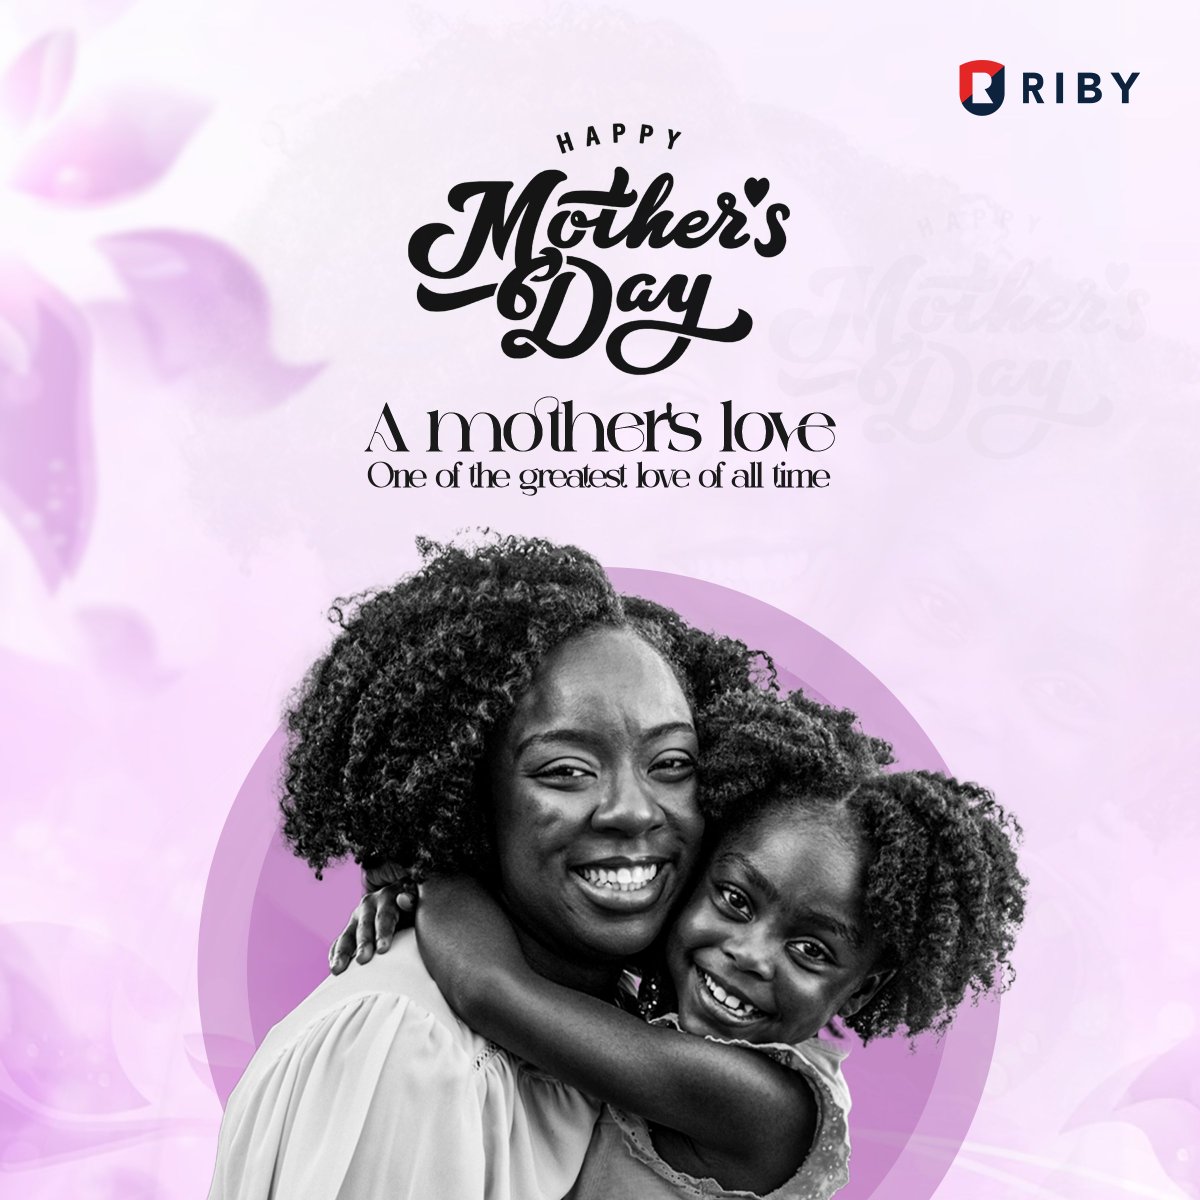 On this special day, we celebrate mothers all around the world for their constant love and contributions to humanity. Thank you for everything. Happy Mother’s Day from all of us at Riby HQ 💙 #MothersDay